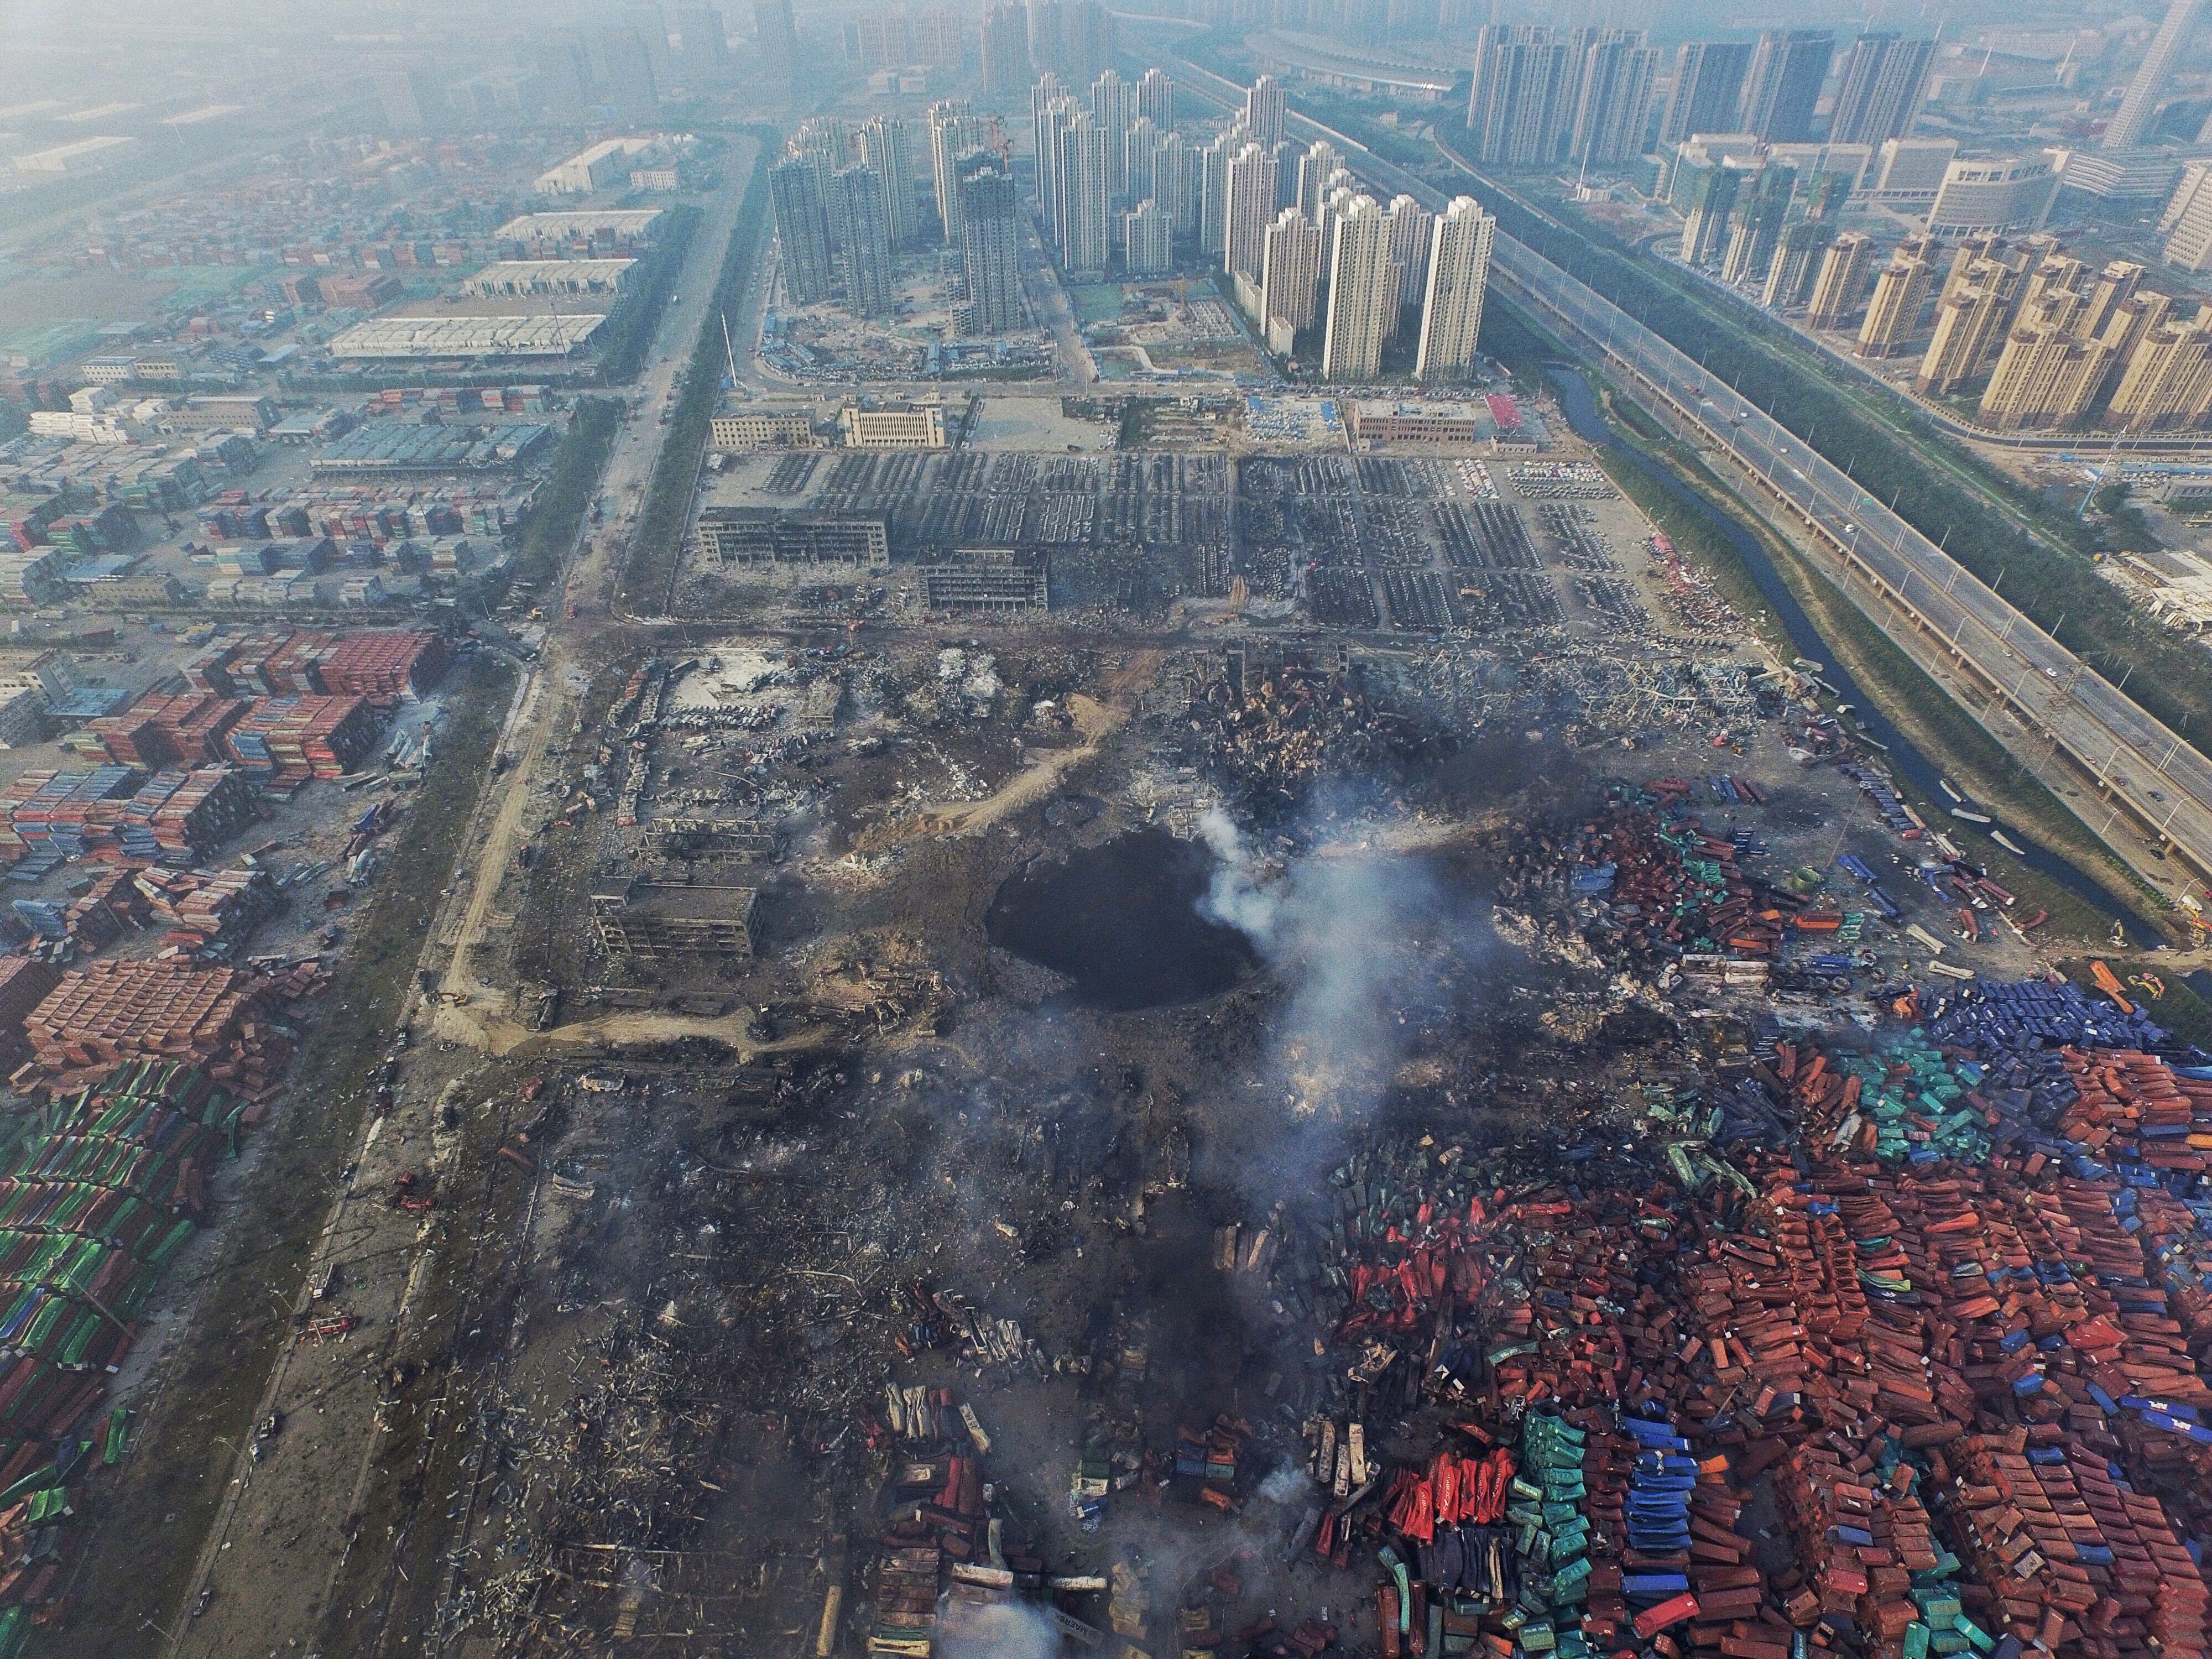 The aftermath of the 2015 Tianjin blast that killed 173 people, many of whom were firefighters. Photo: EPA